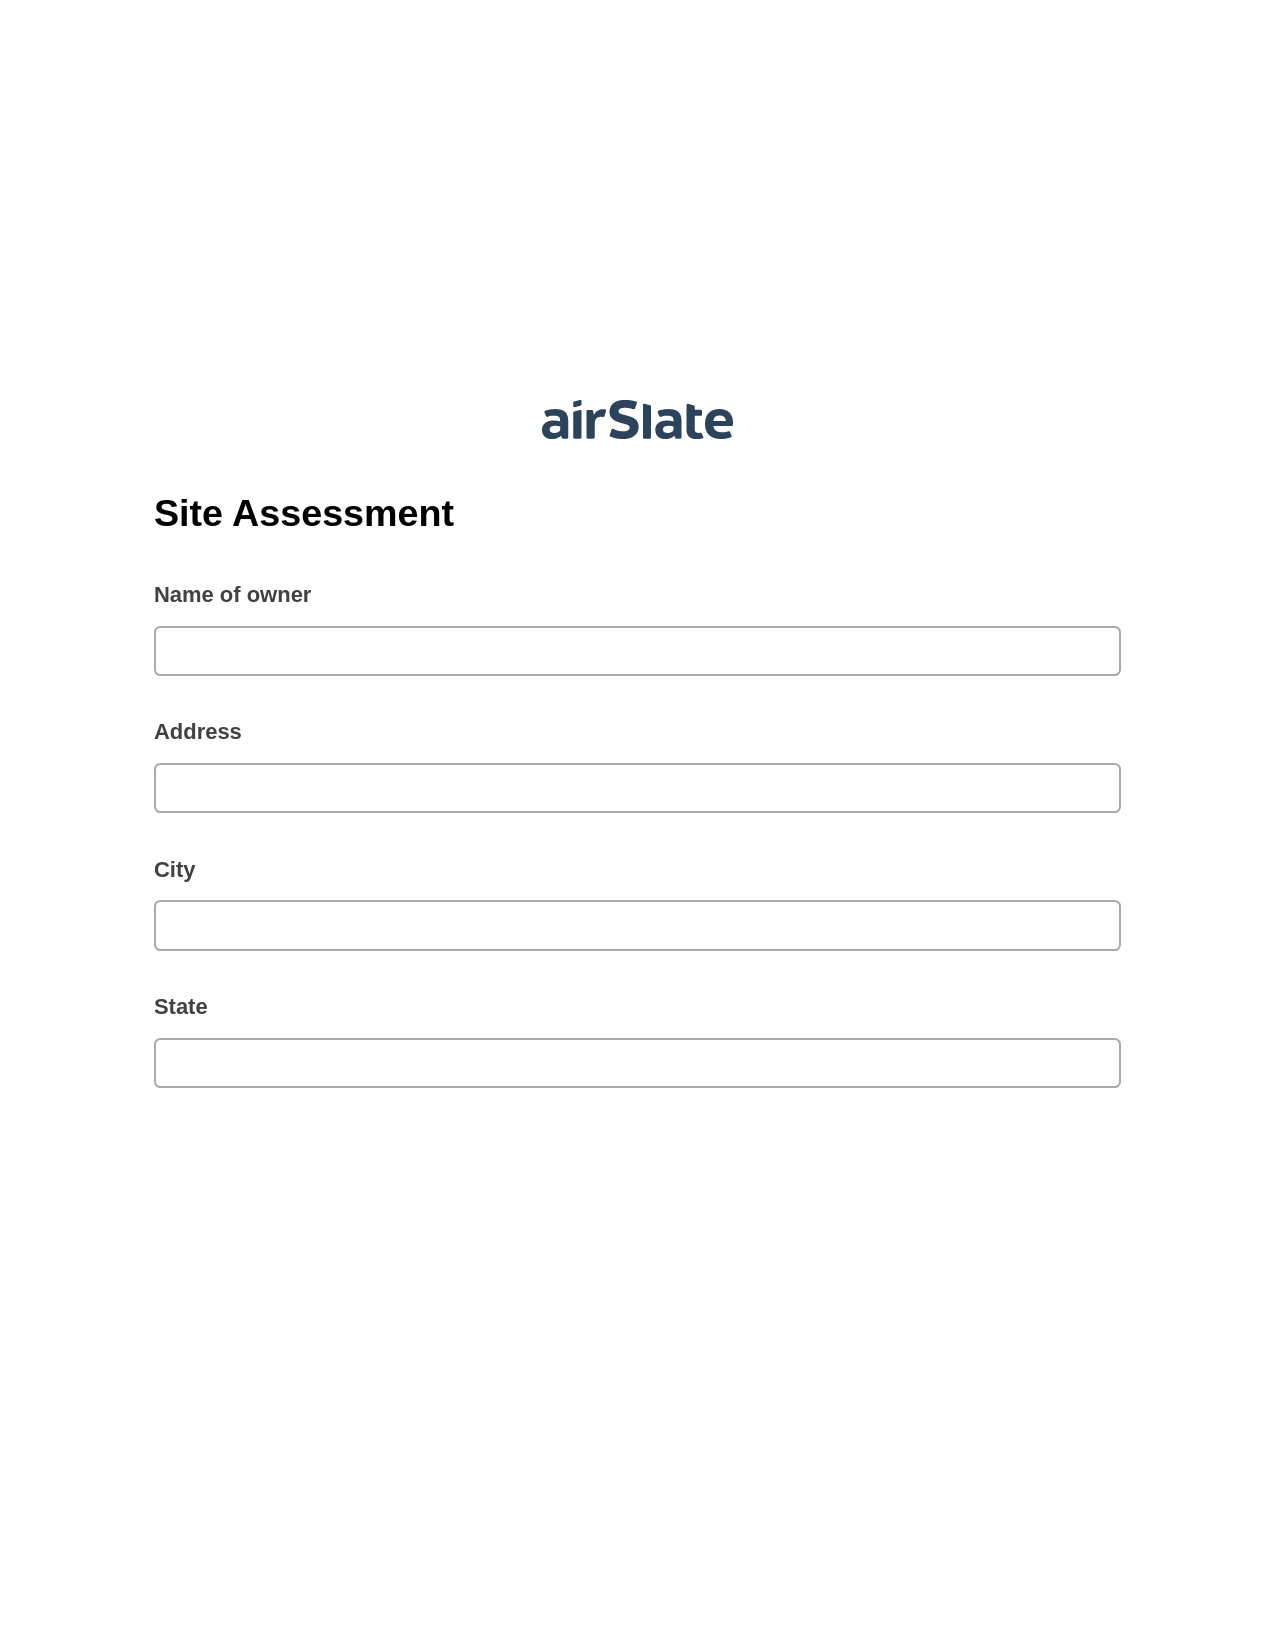 Multirole Site Assessment Pre-fill from Excel Spreadsheet Bot, Unassign Role Bot, Archive to SharePoint Folder Bot